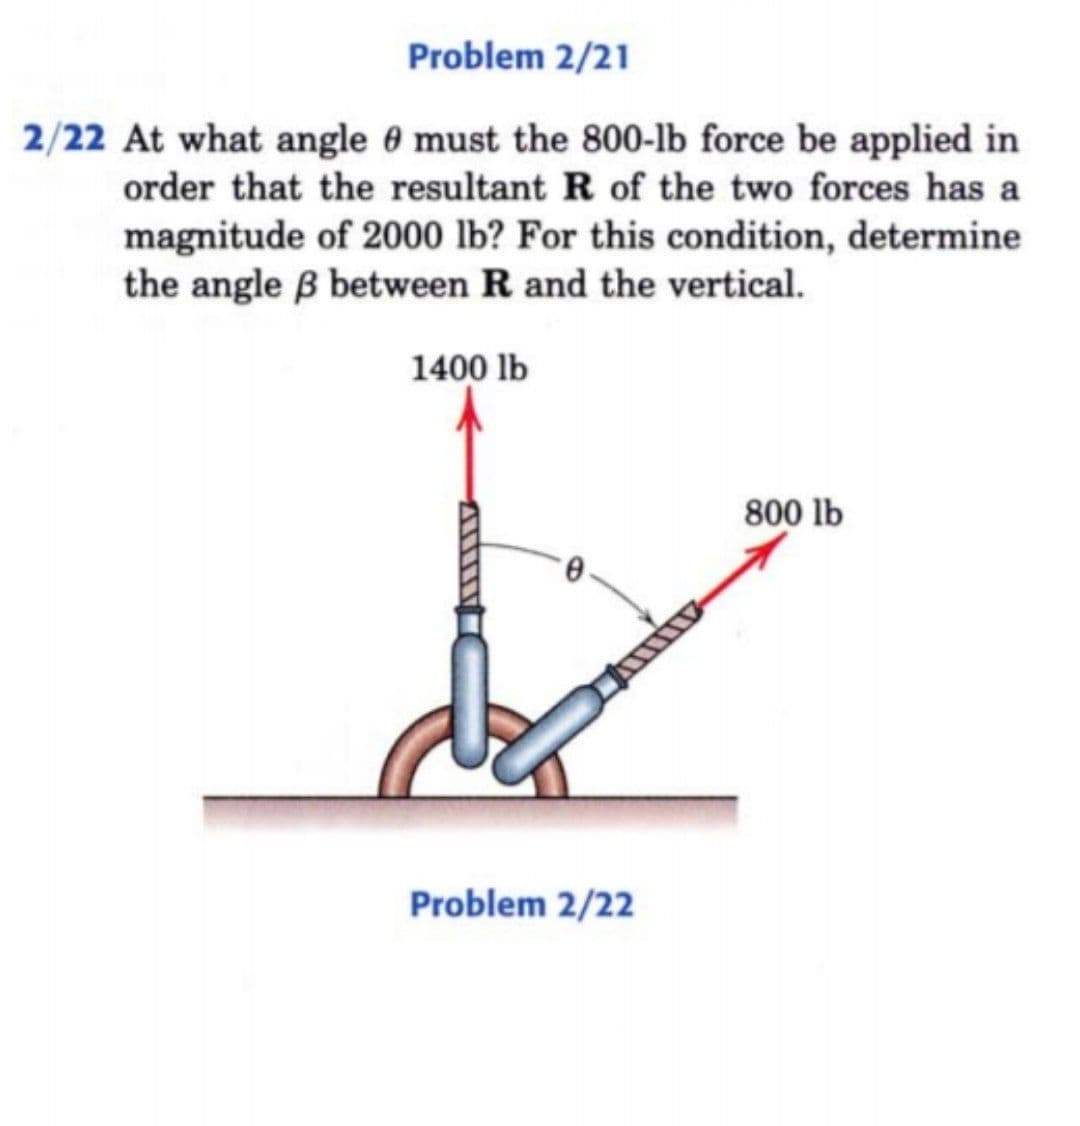 Problem 2/21
2/22 At what angle 0 must the 800-lb force be applied in
order that the resultant R of the two forces has a
magnitude of 2000 lb? For this condition, determine
the angle B between R and the vertical.
1400 lb
800 lb
Problem 2/22
